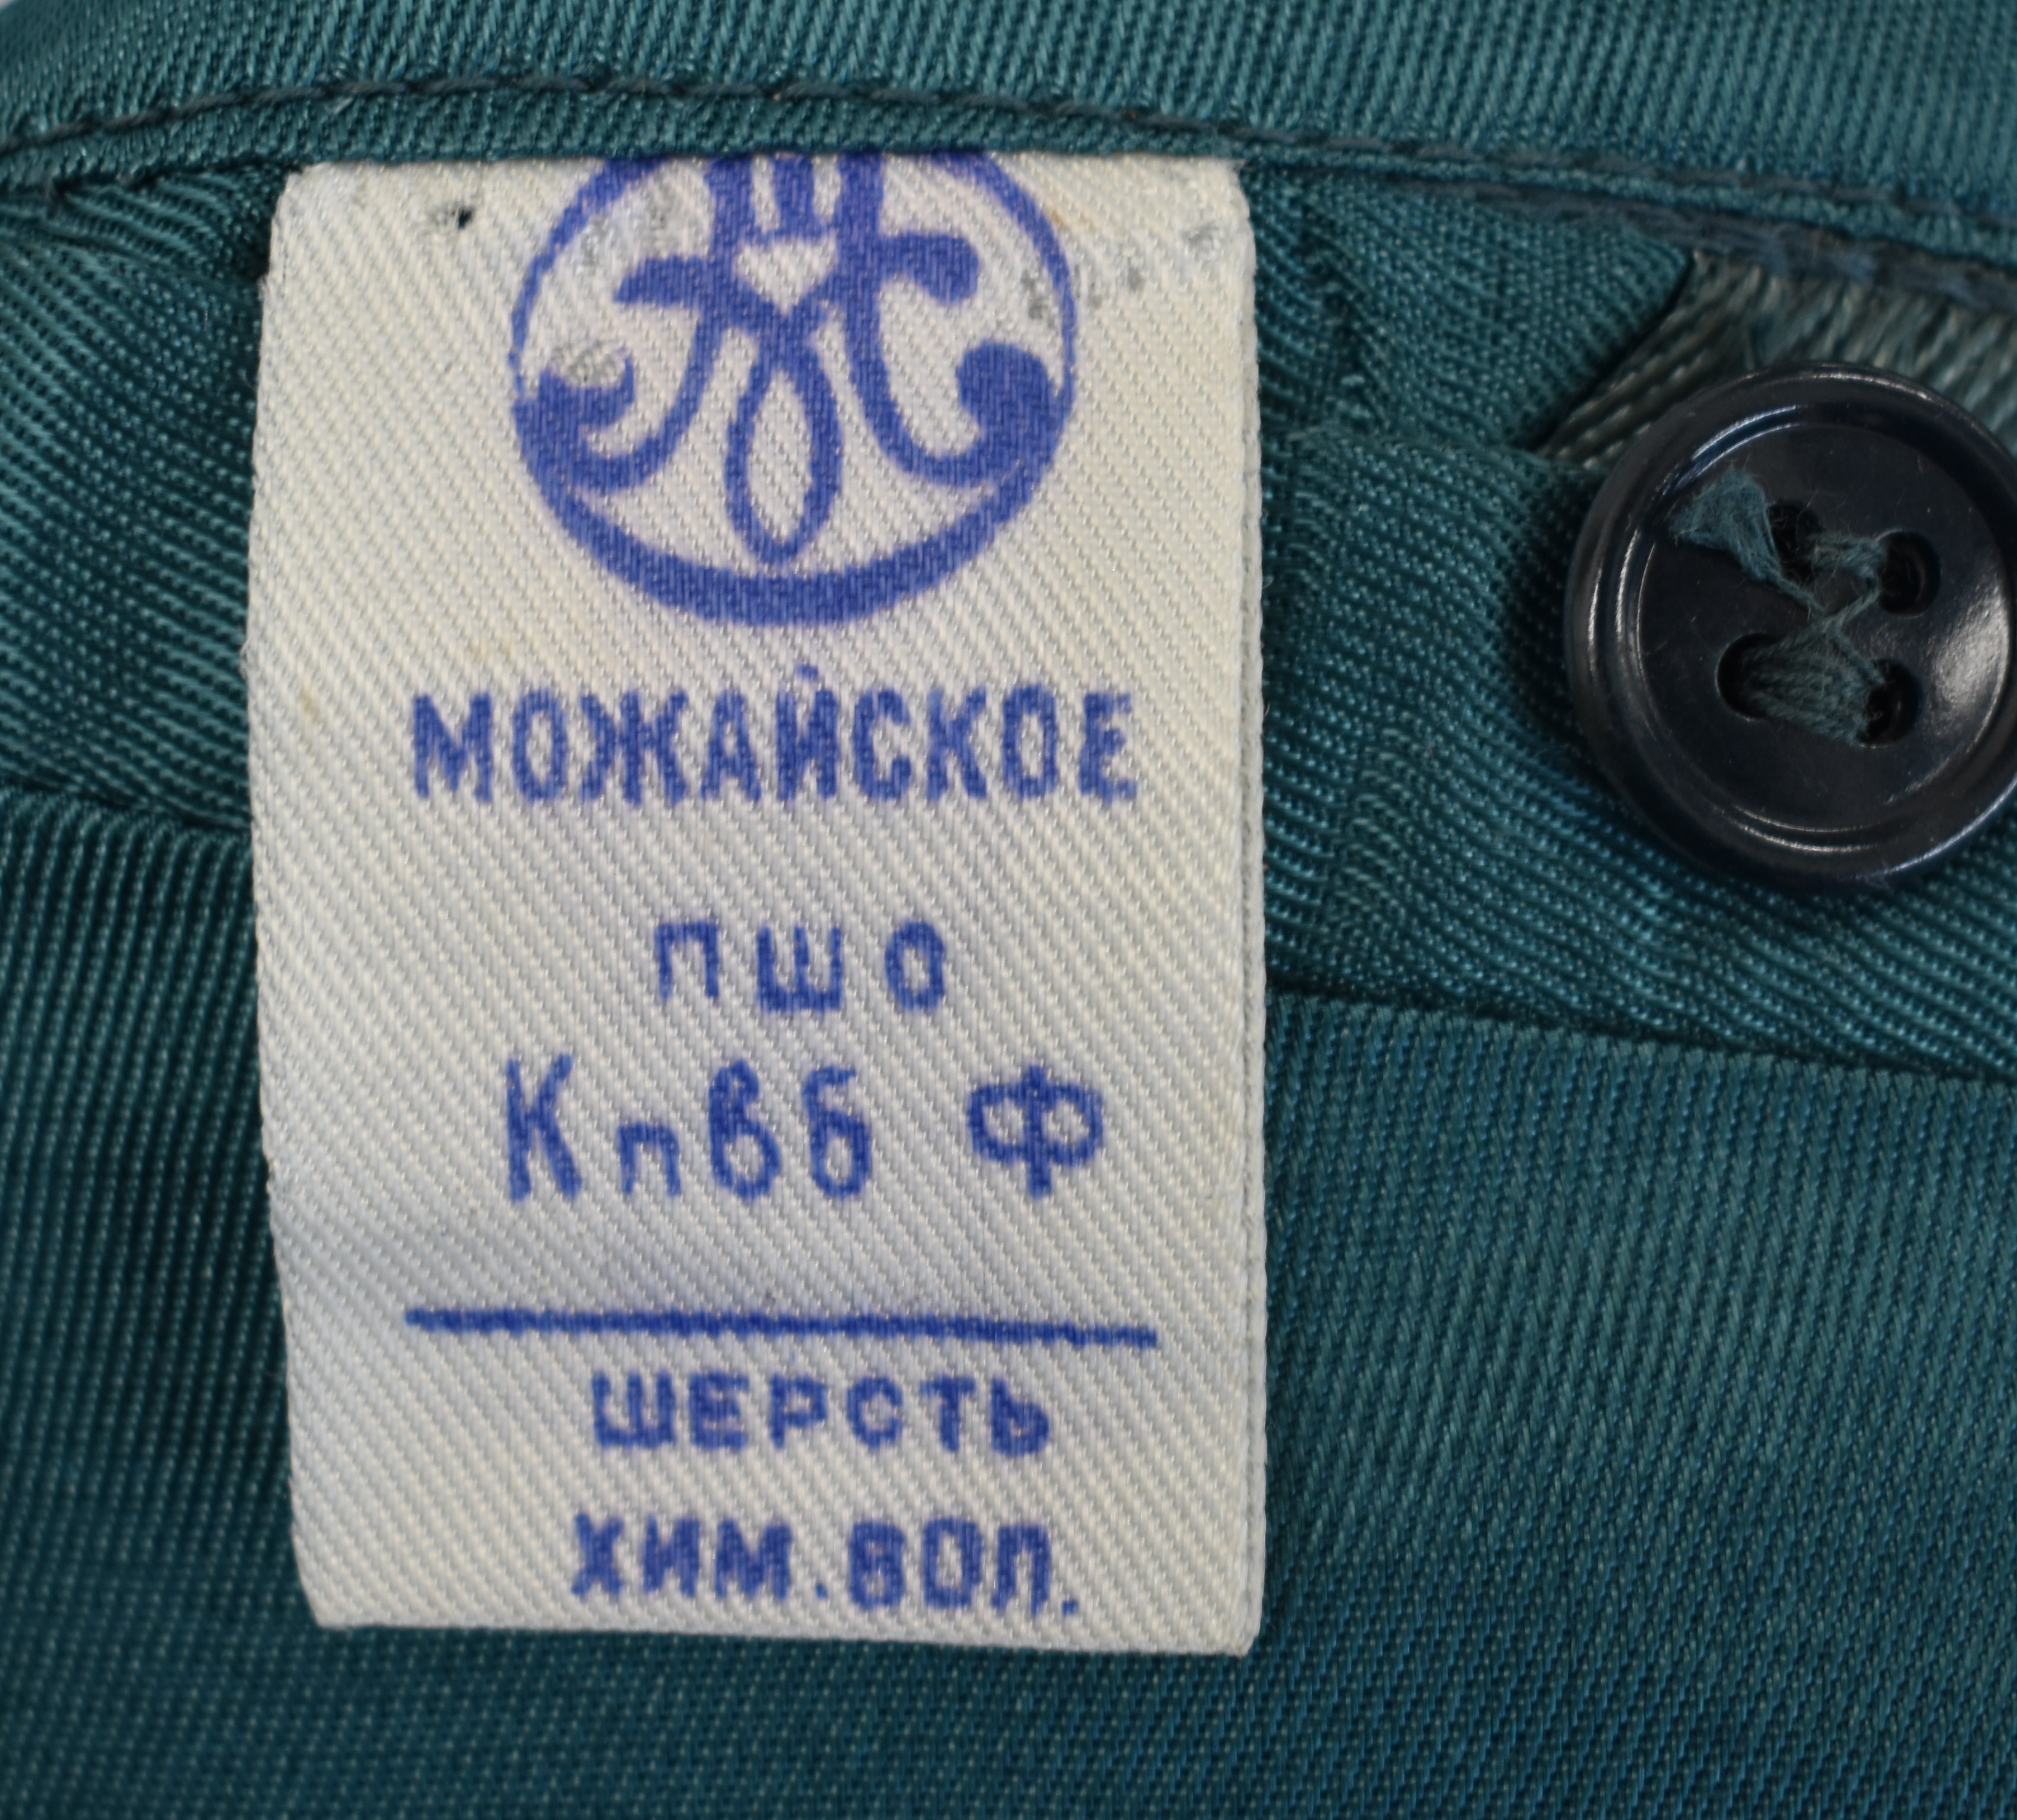 Russian Air Force Cold War uniform comprising tunic and trousers with insignia - the vendor - Image 6 of 7